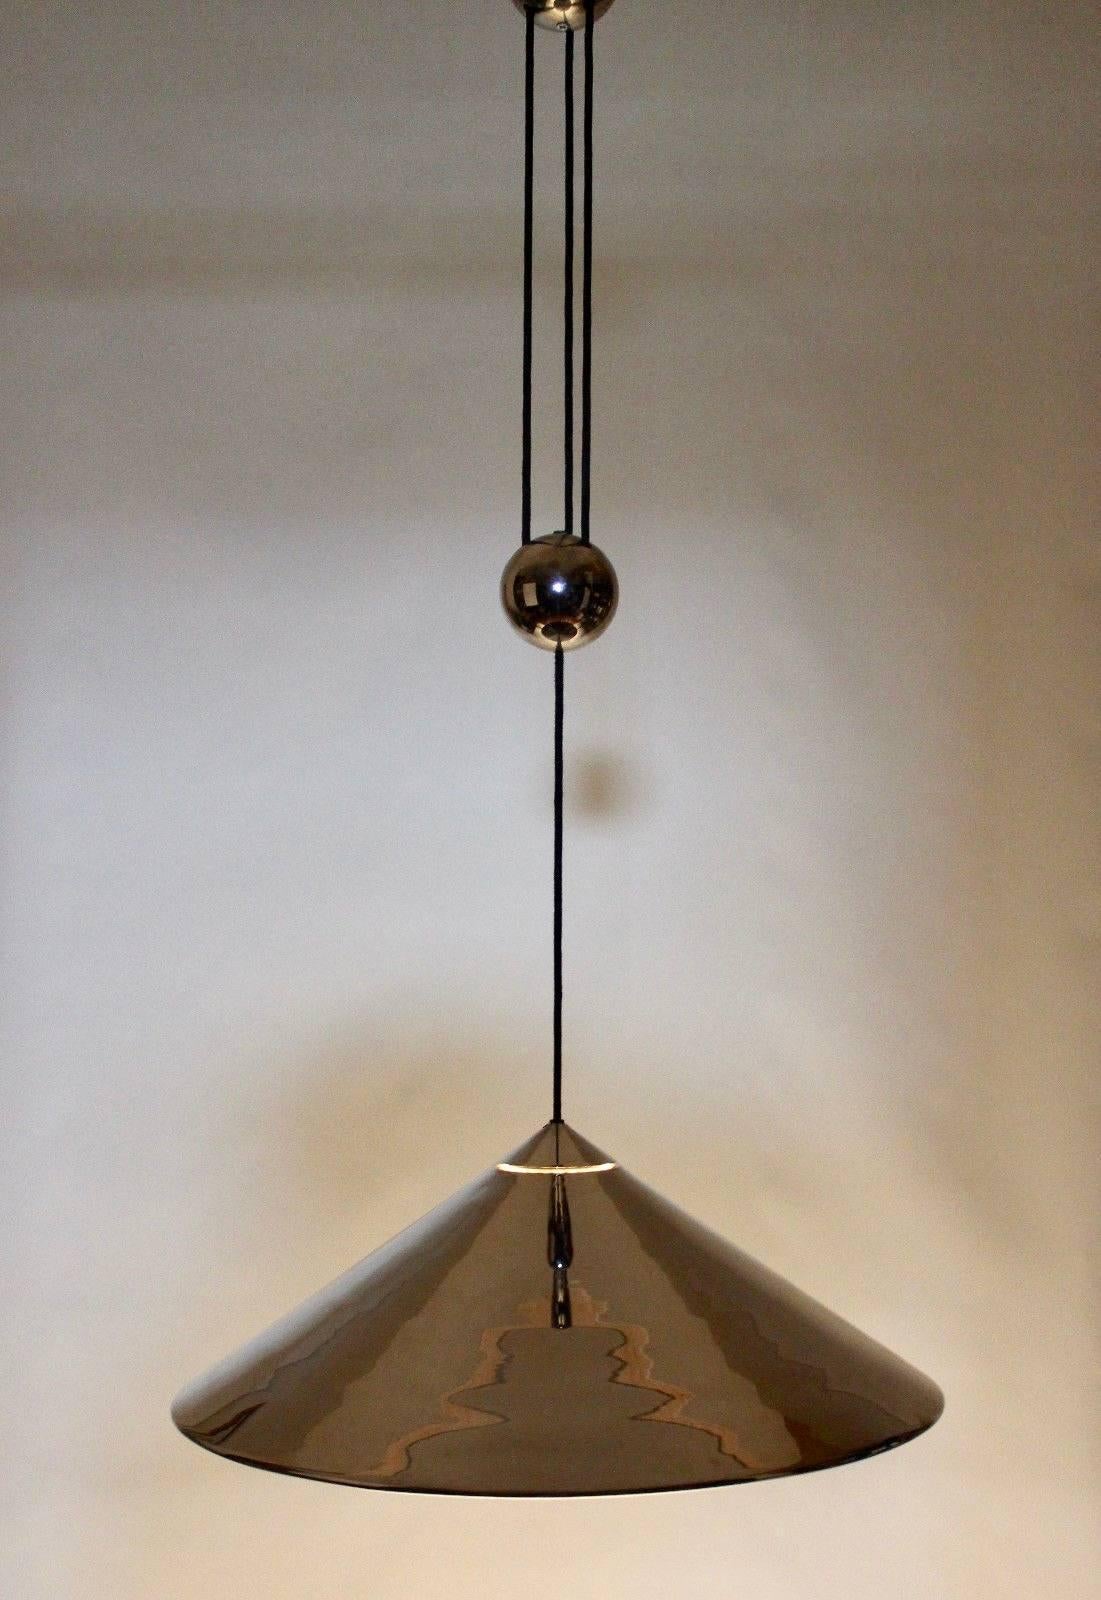 Stunning counter balance pendant by Florian Schulz. Polished nickel in excellent condition. Pendant adjusts in height by pulling down or pushing up. Great piece of art for your ceiling. Takes a 100w maximum bulb.